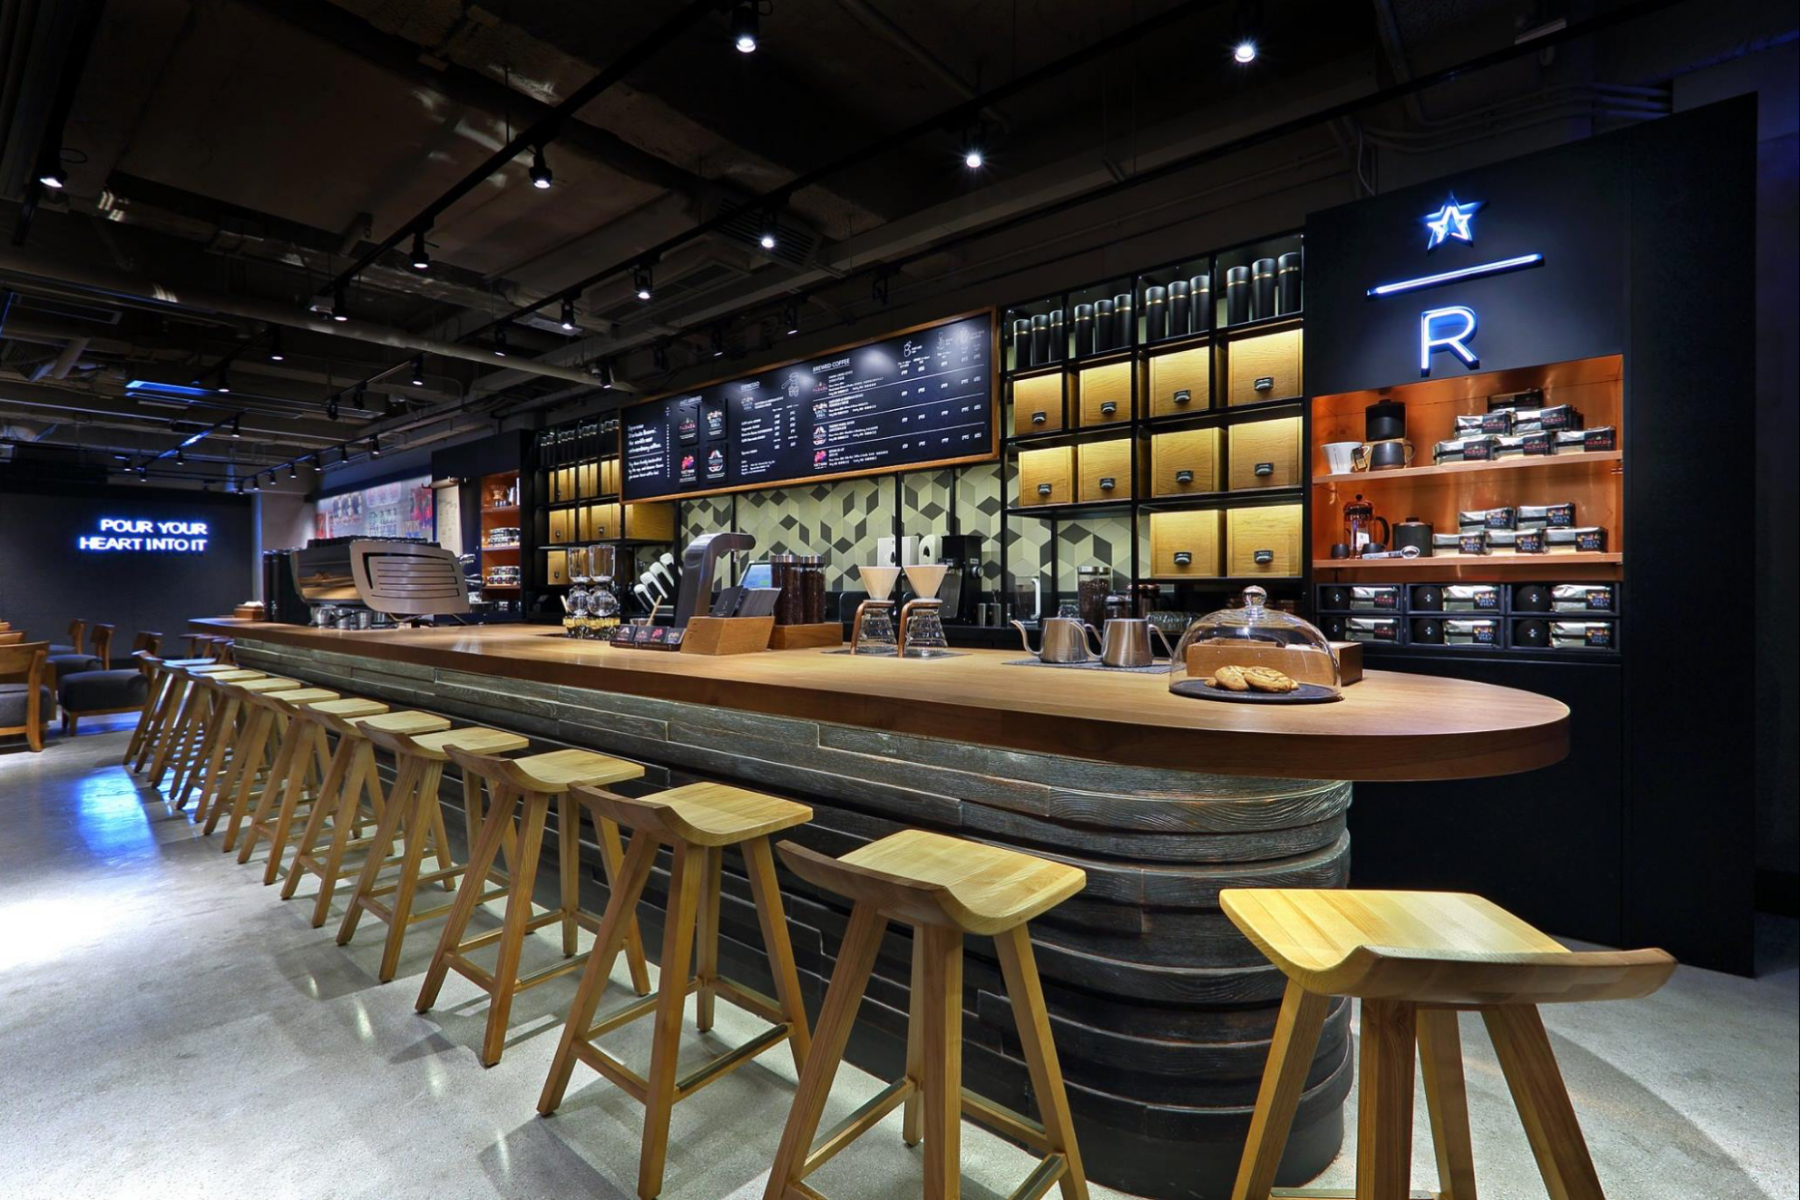 Starbucks - seating and décor elements